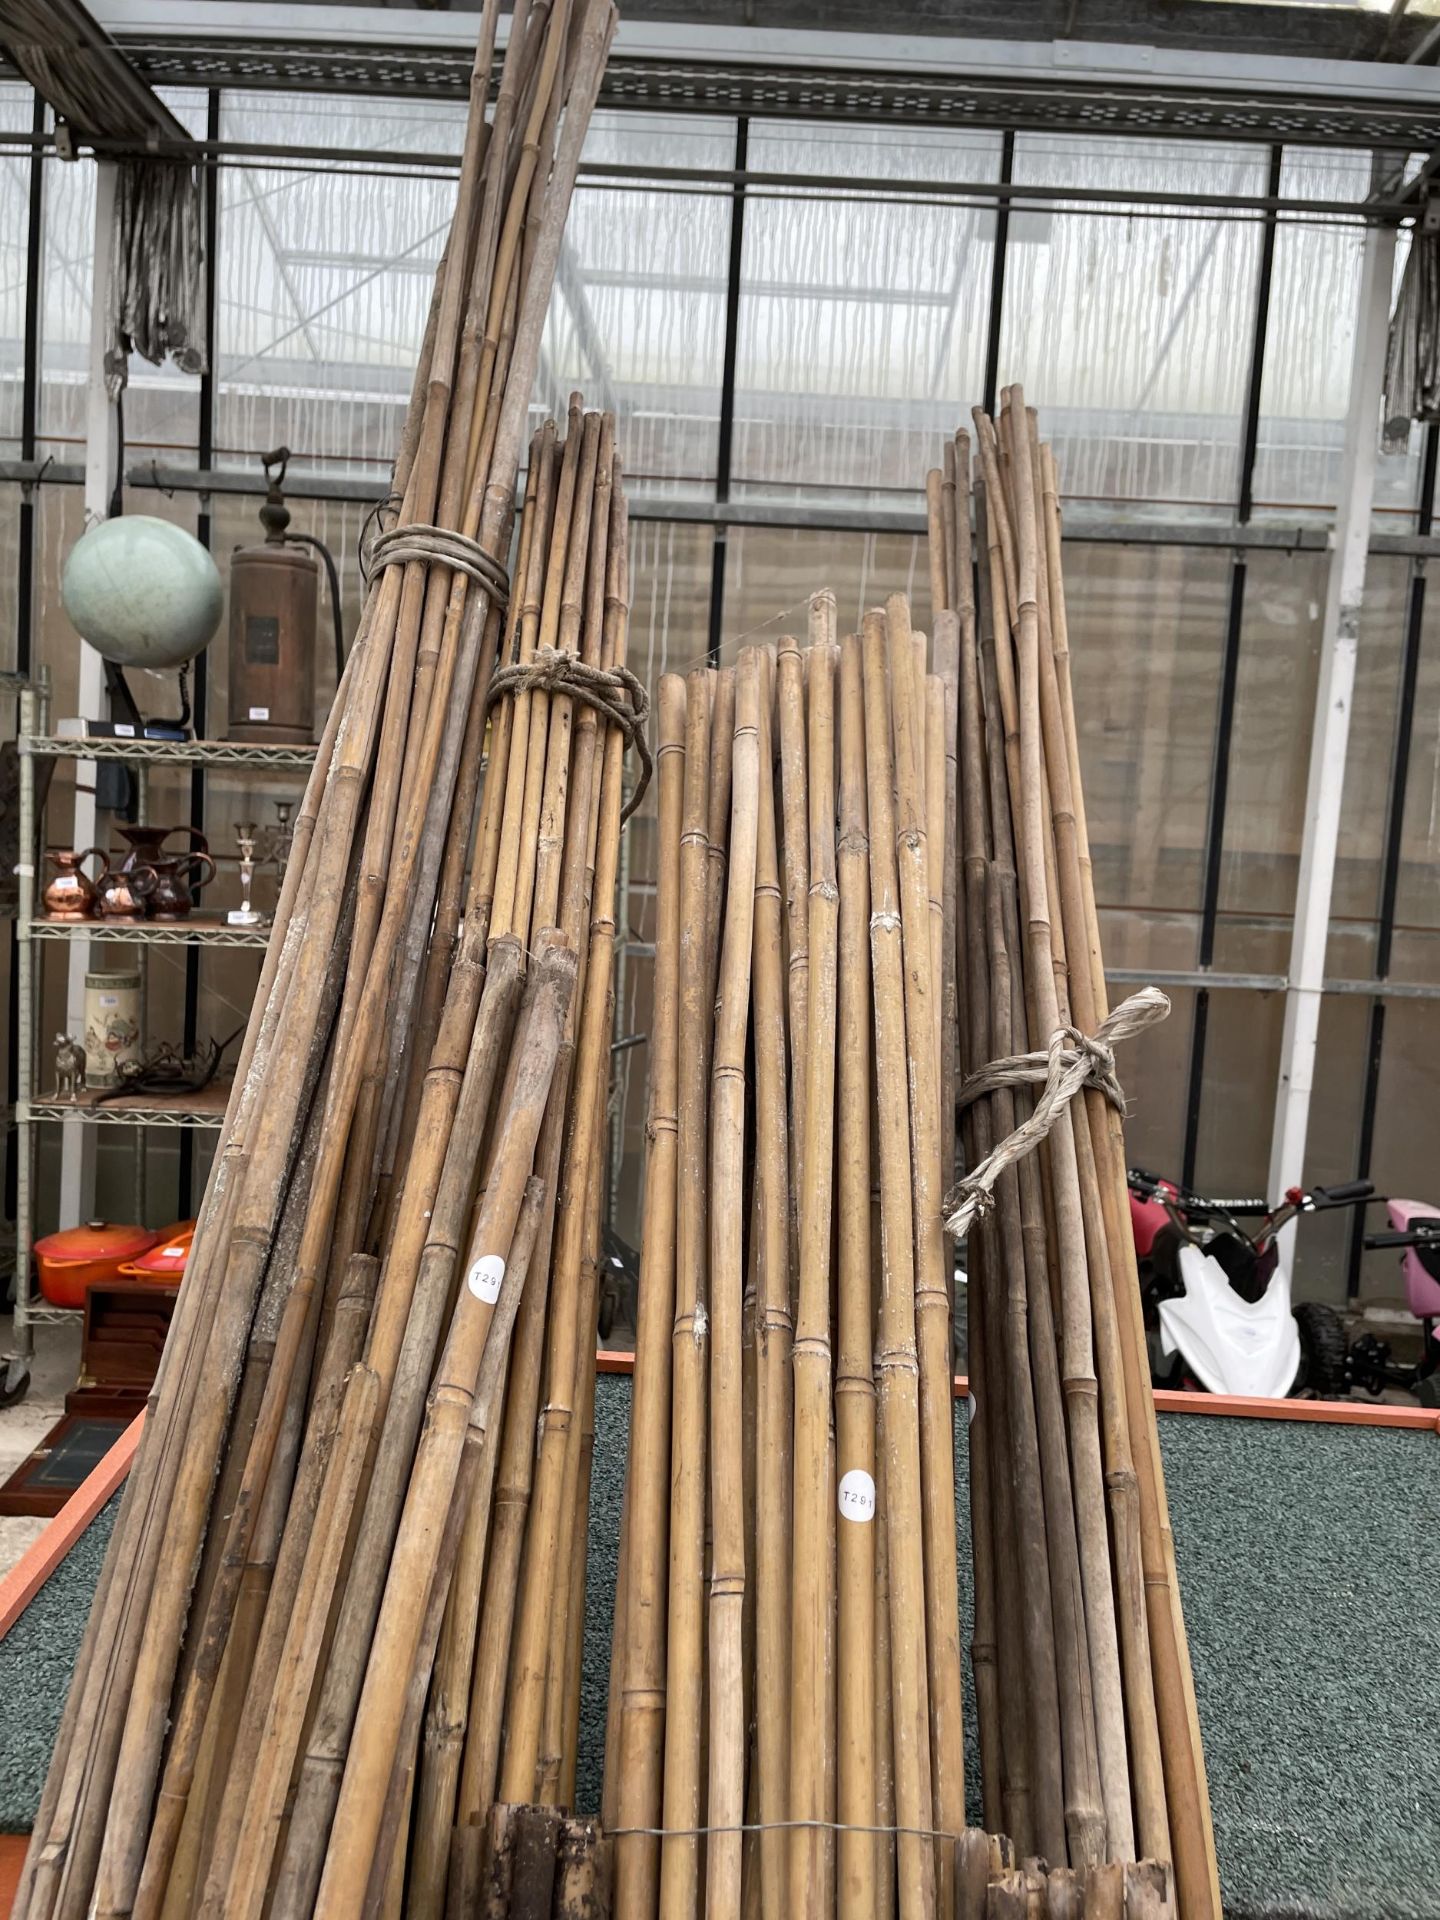 A LARGE QUANTITY OF BAMBOO GARDEN CANES - Image 2 of 3